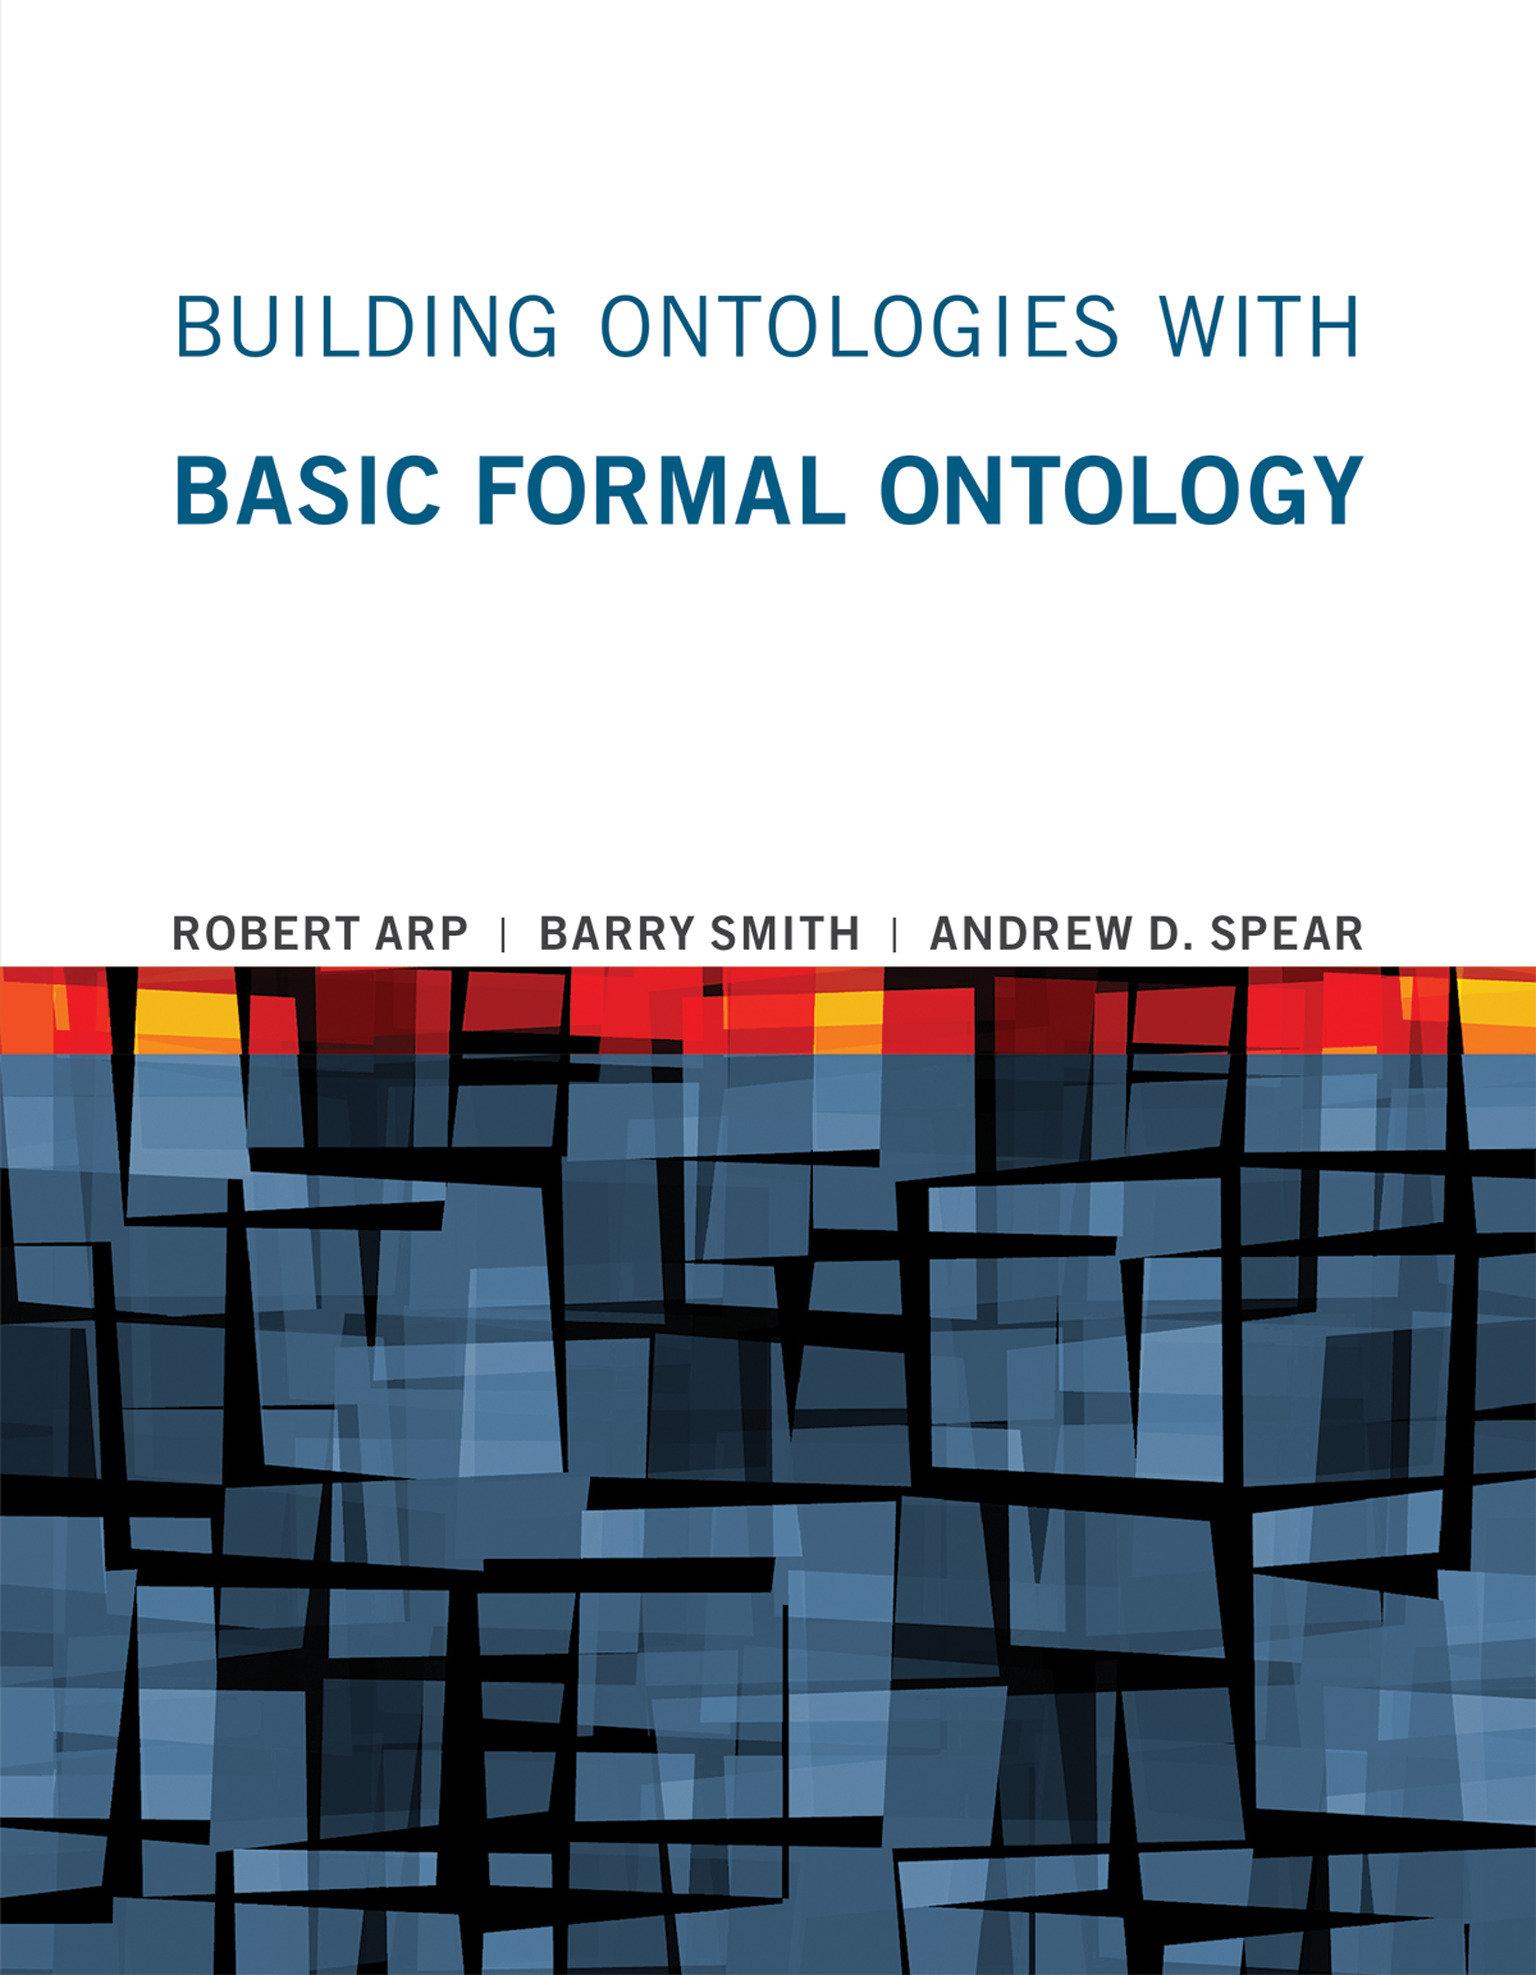 Building Ontologies with Basic Formal Ontology - Robert Arp Barry Smith Andrew D. Spear